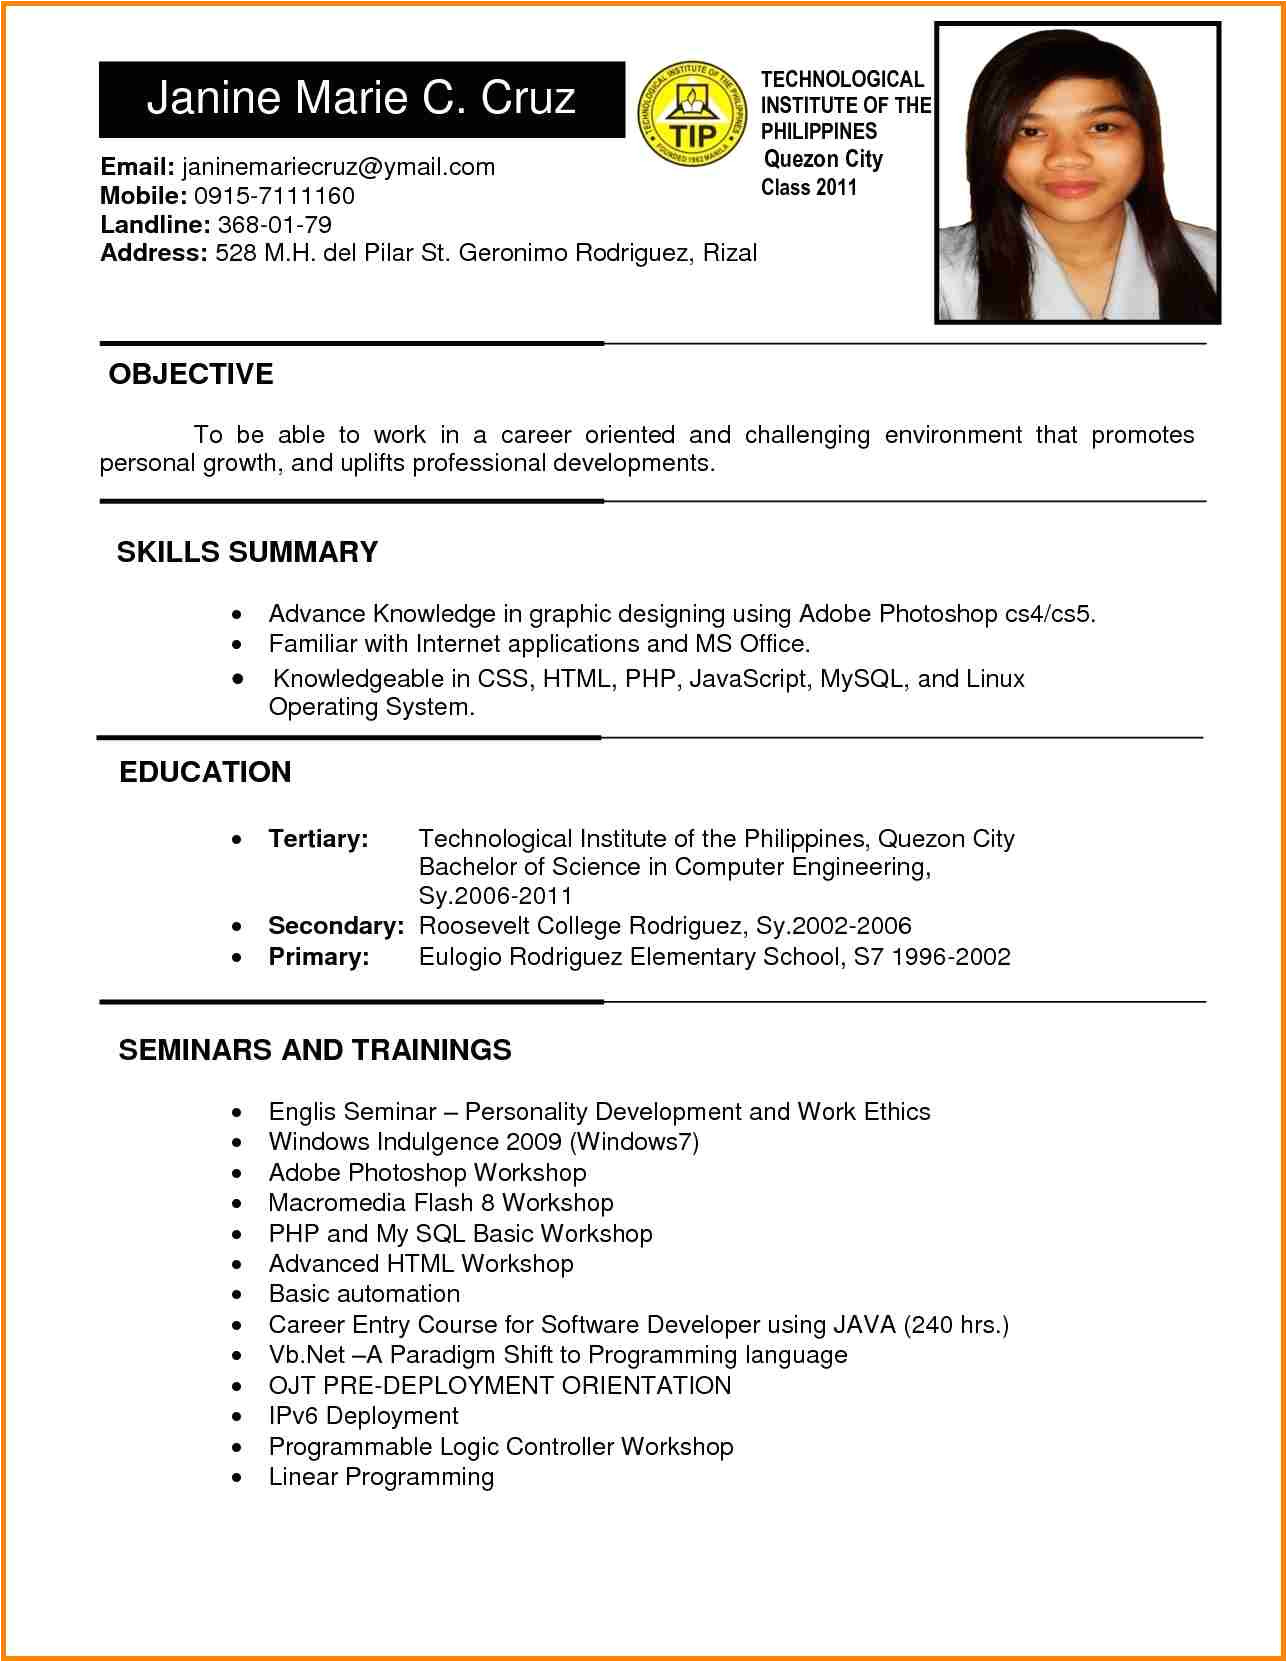 Basic Resume In Philippines 6 Example Of Filipino Resume format Penn Working Papers